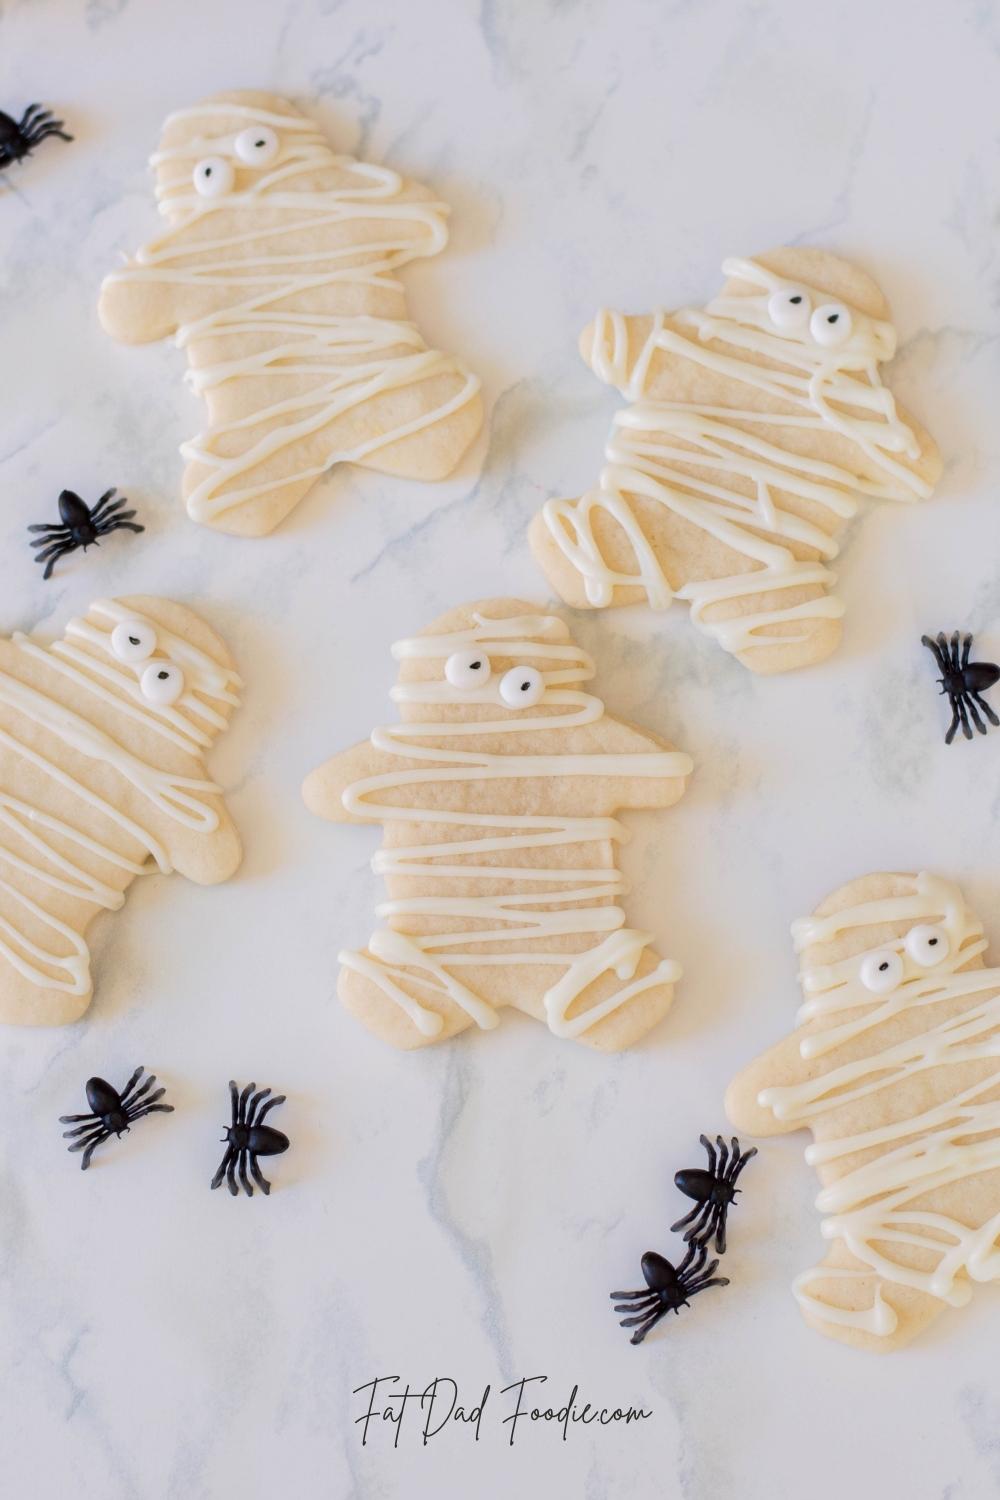 mummy cookies with spiders laying flat